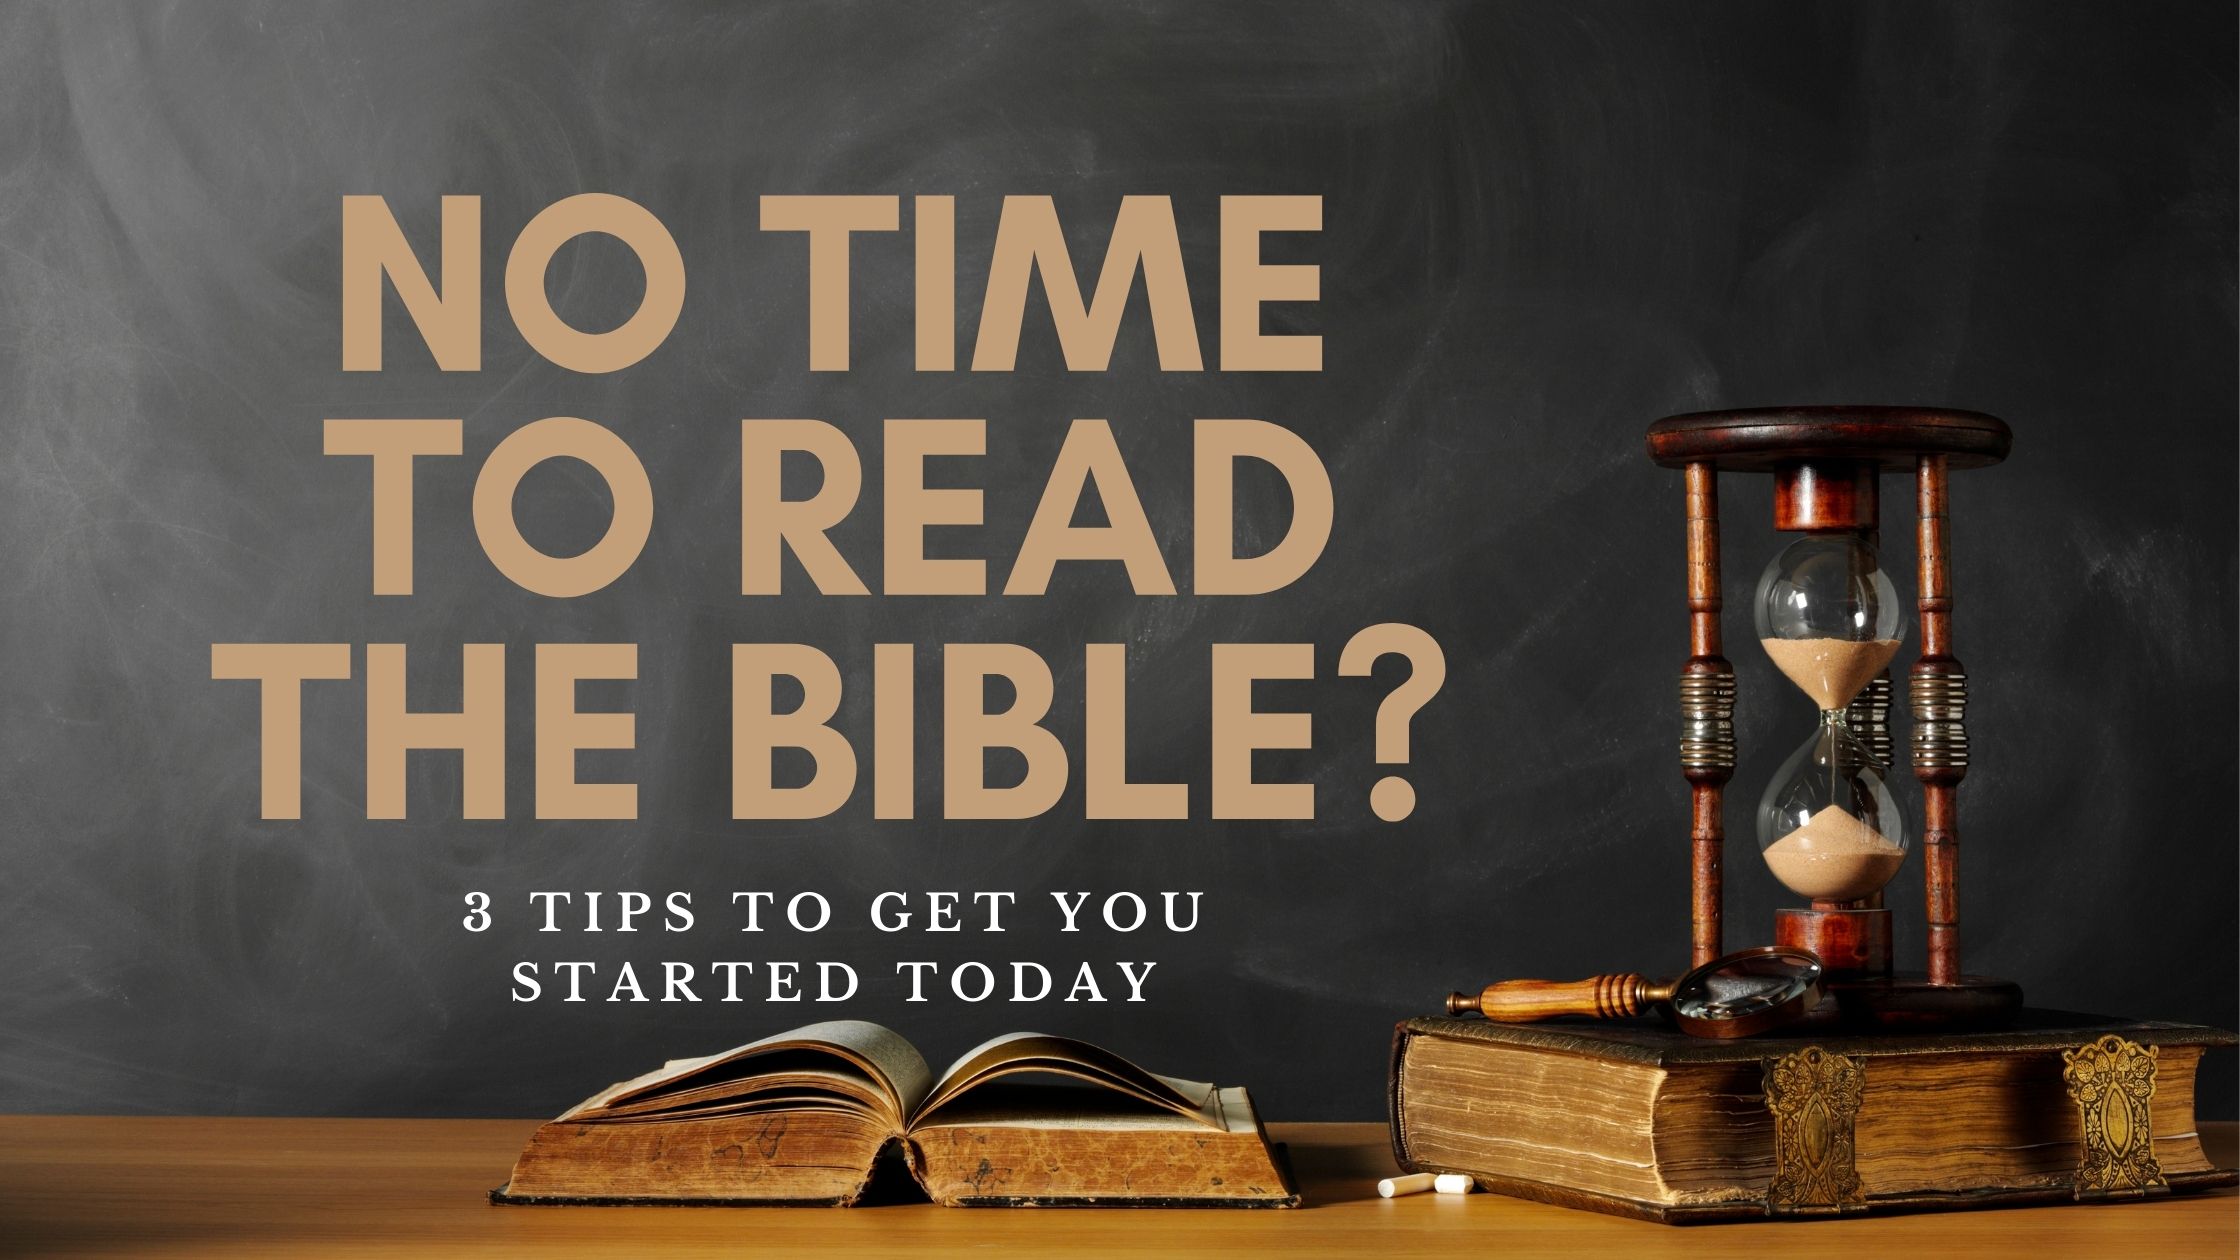 No time to read the bible